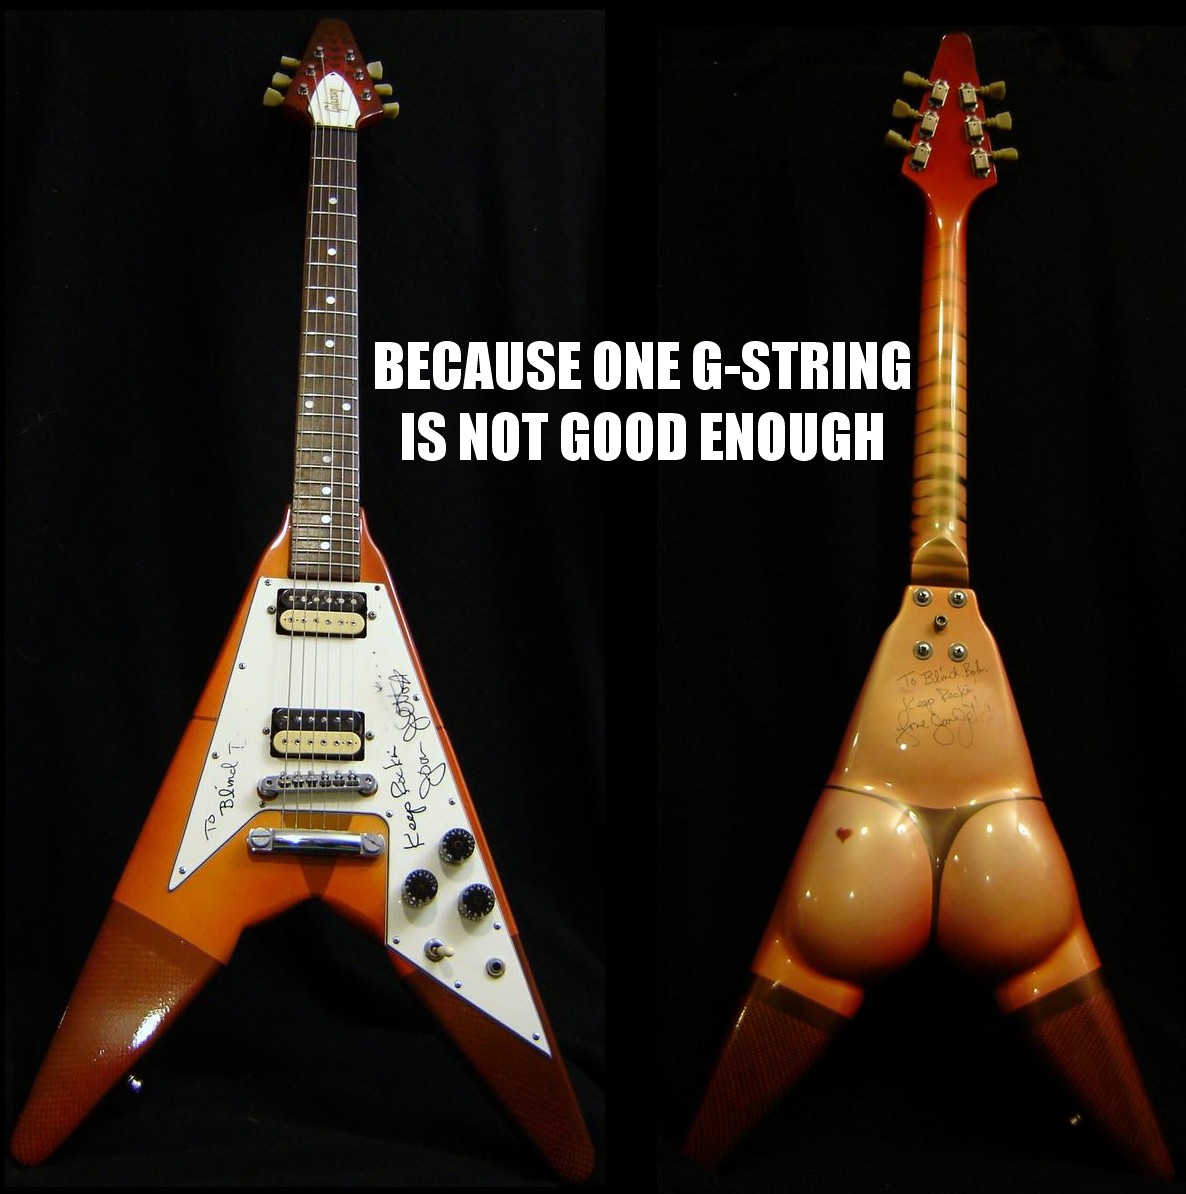 Because One G-String is Not Good Enough